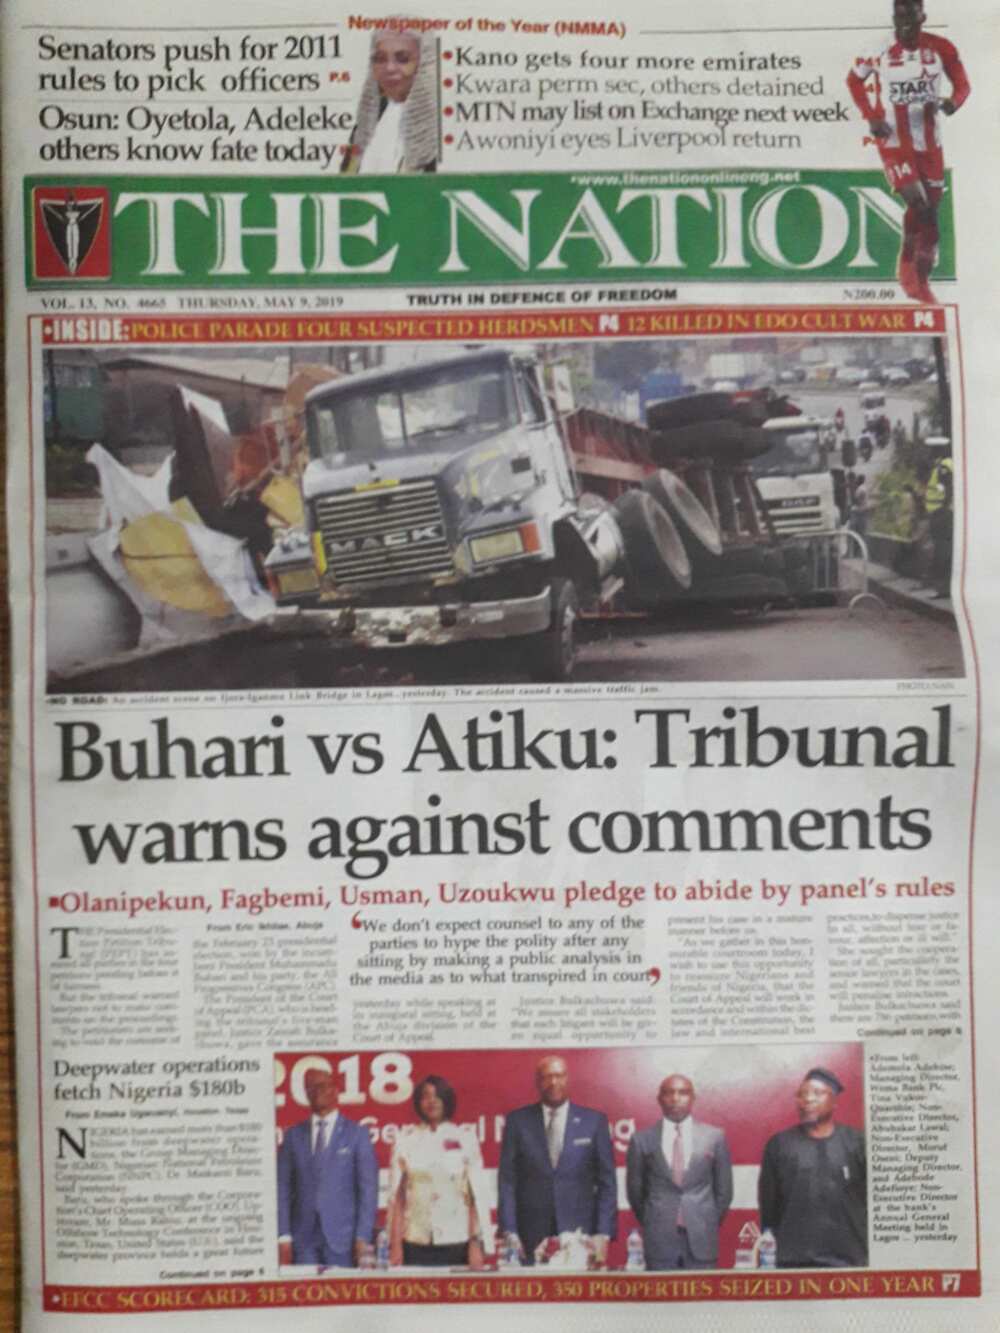 The Nation newspaper of May 9